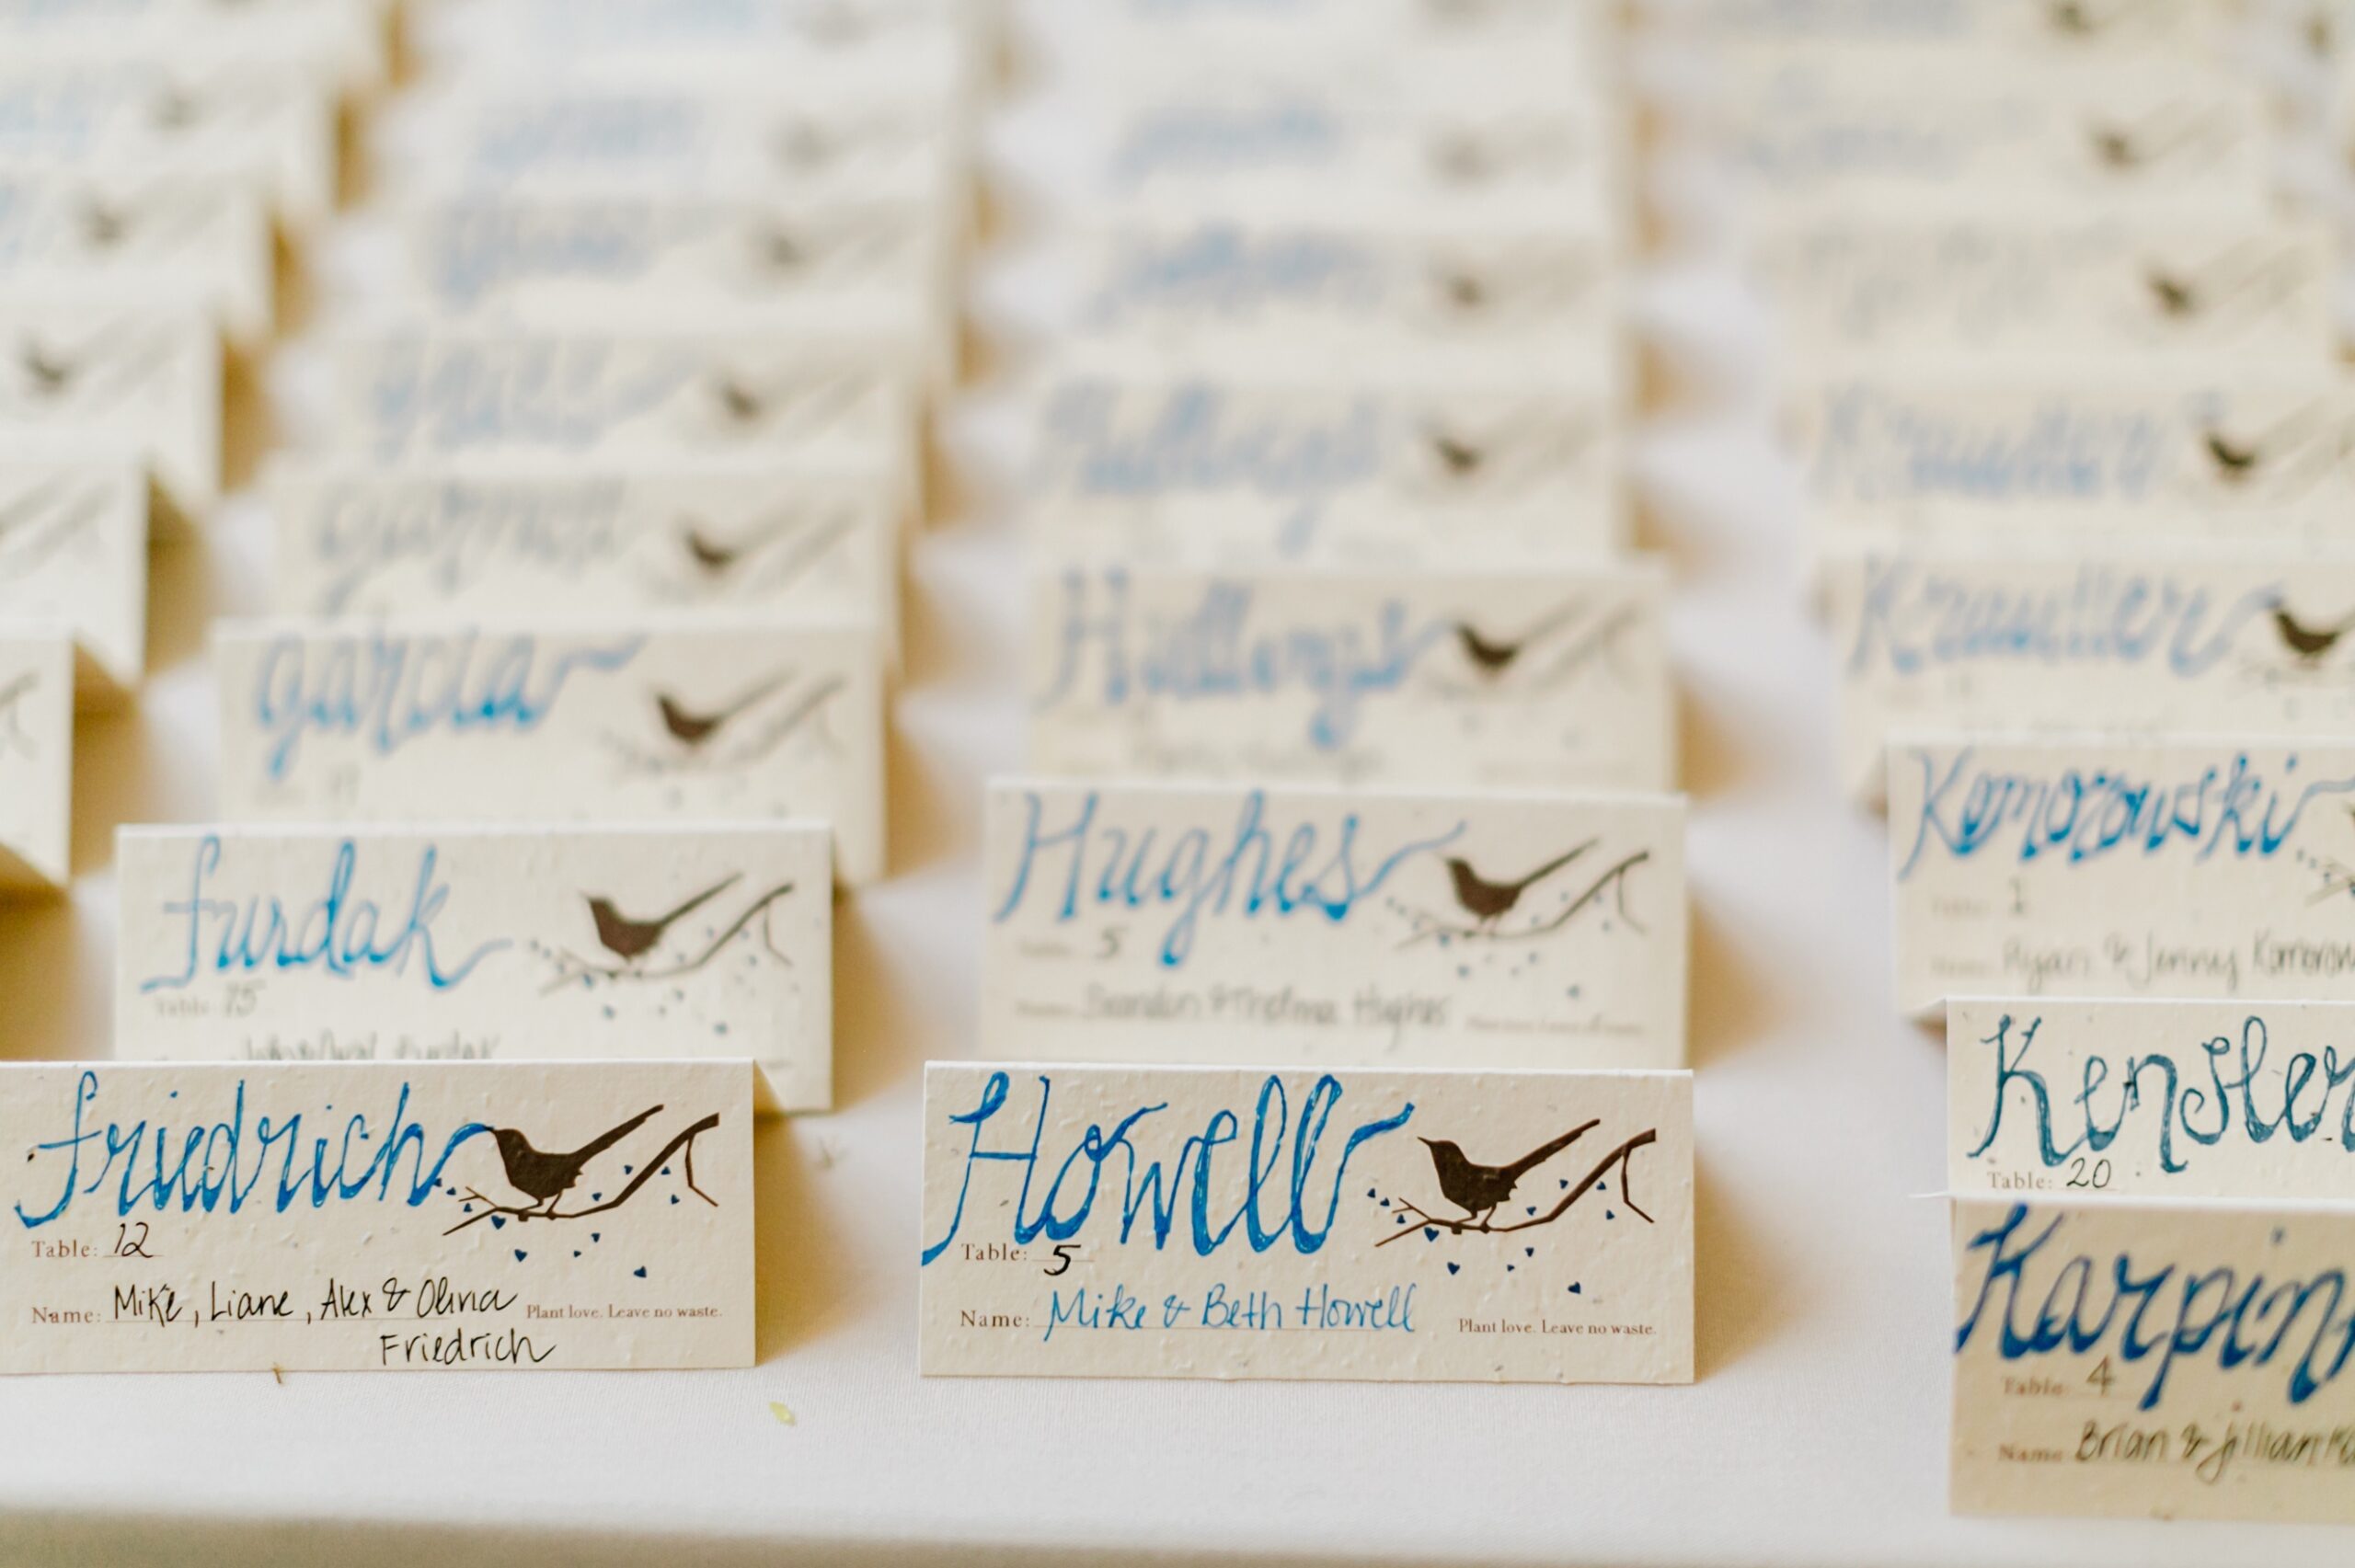 Hand calligraphy place settings for a whimsical wedding reception